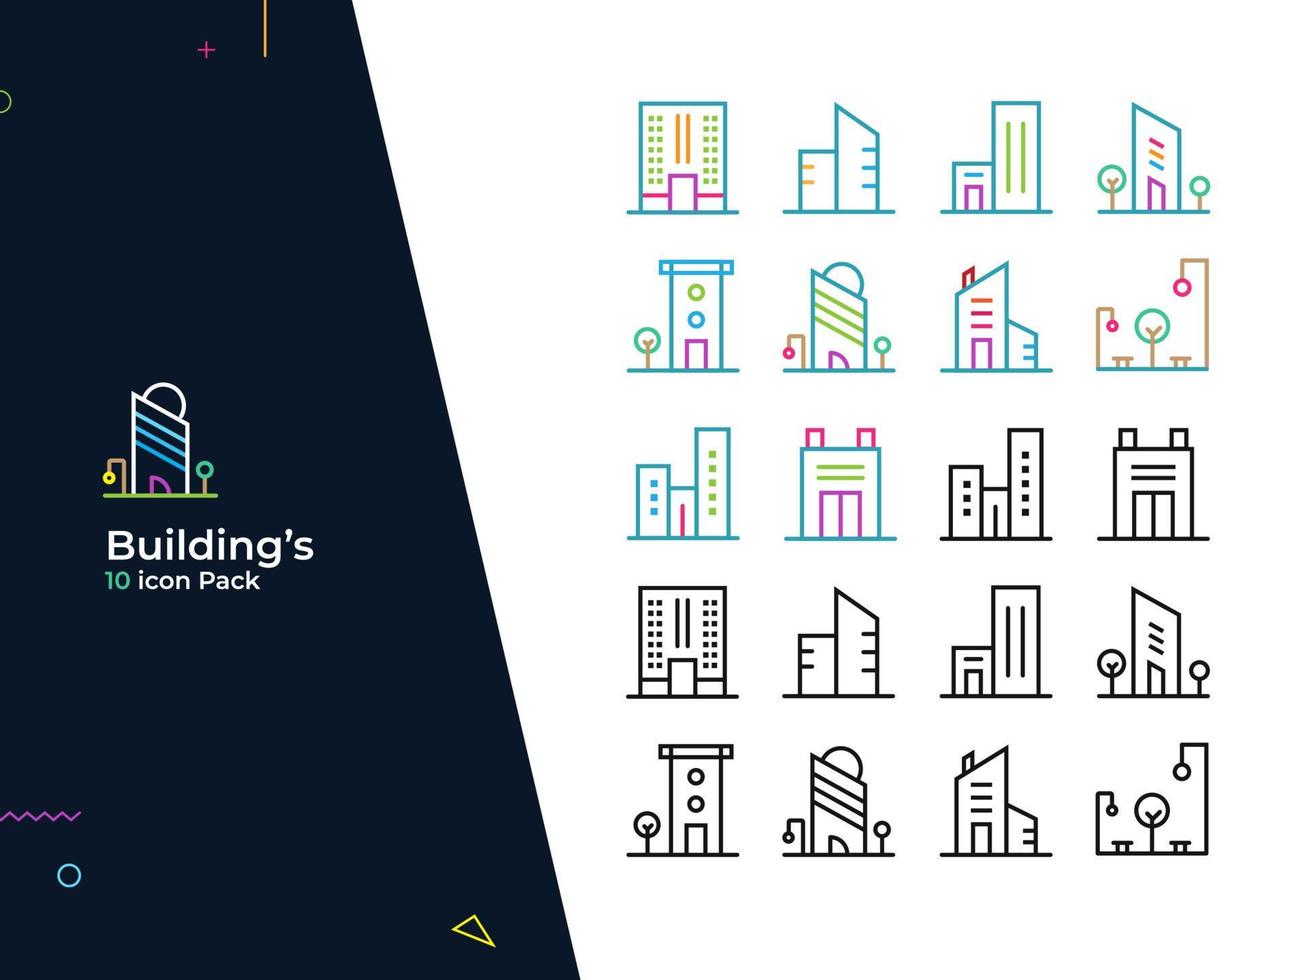 Buildings - 10 icon pack. Suitable for website, mobile app, poster, presentation, flyer, printing, social media, etc vector